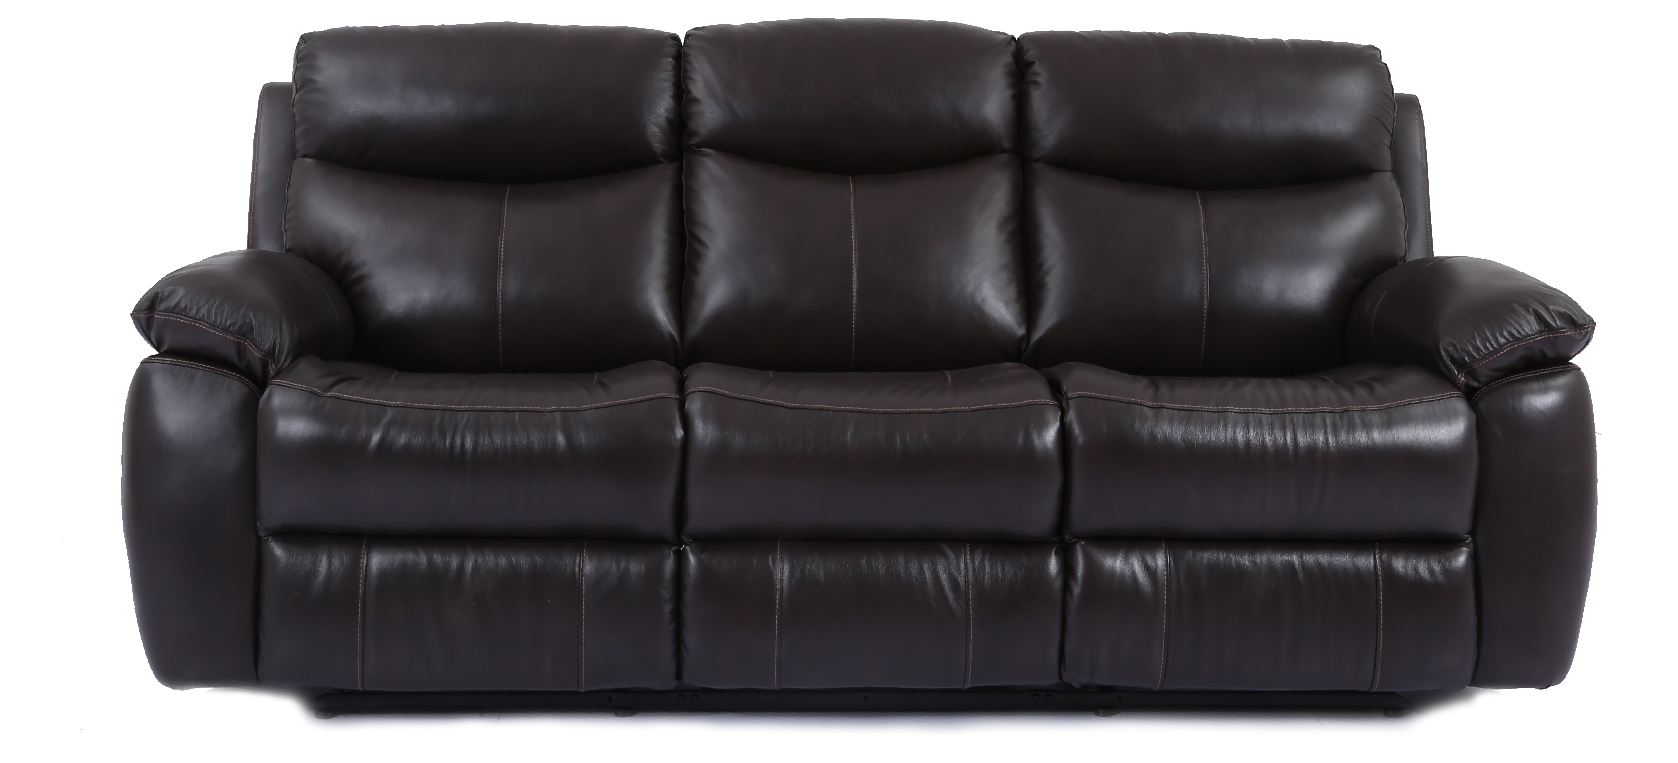 5266 3 PIECE LEATHER RECLINER LOUNGE SUITE